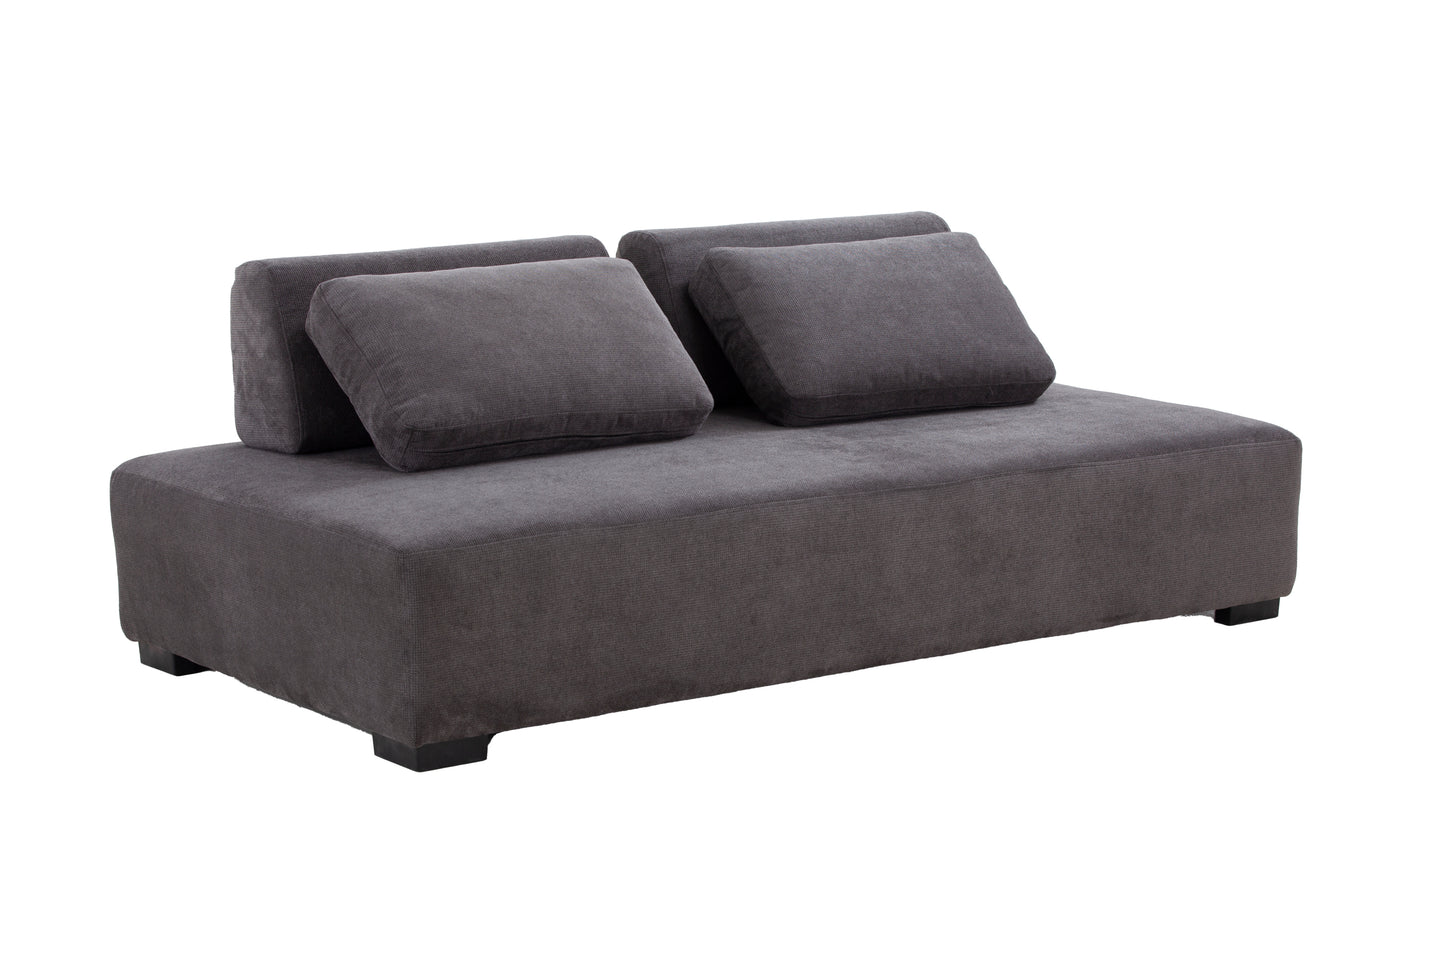 85.4'' Minimalist Sofa 3-Seater Couch for Apartment, Business Lounge, Waiting Area, Hotel Lobby - Grey